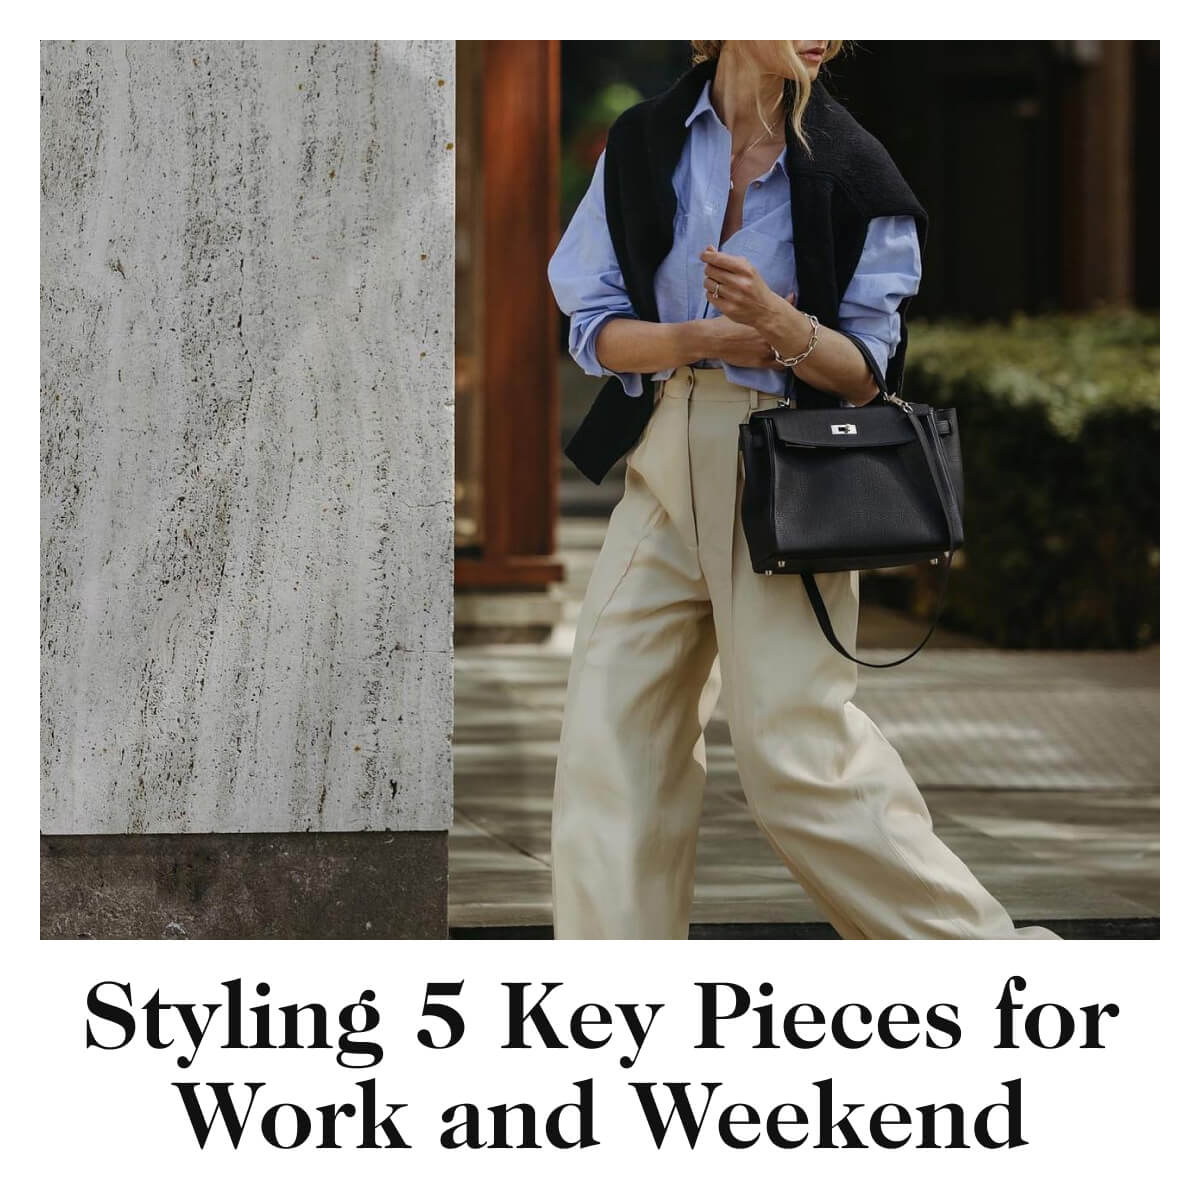 Styling 5 Key Pieces for Work and Weekend